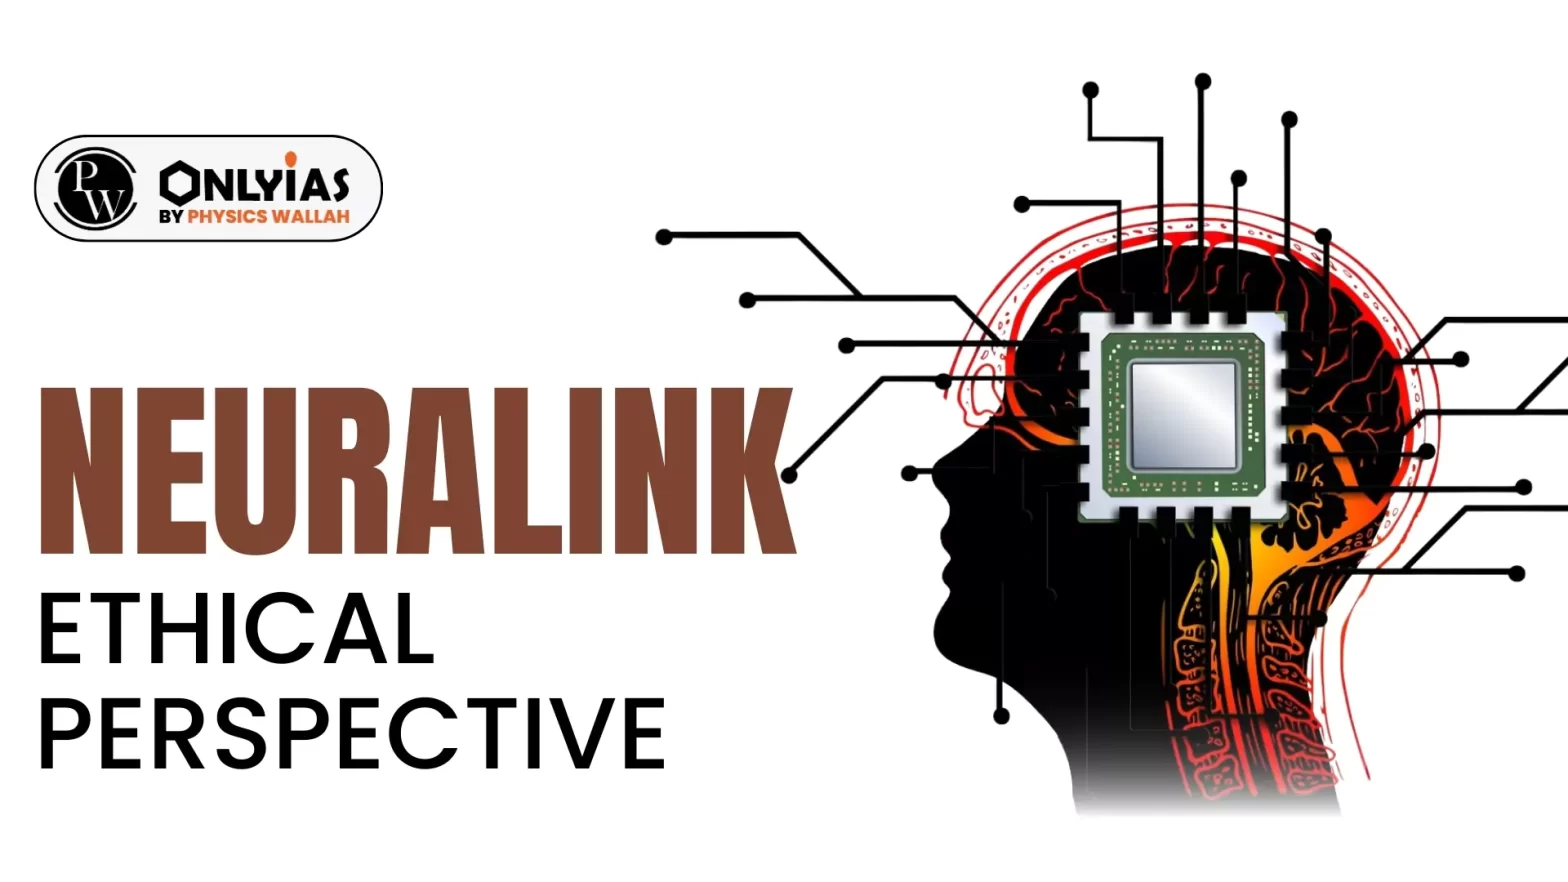 Neuralink: Ethical Perspective